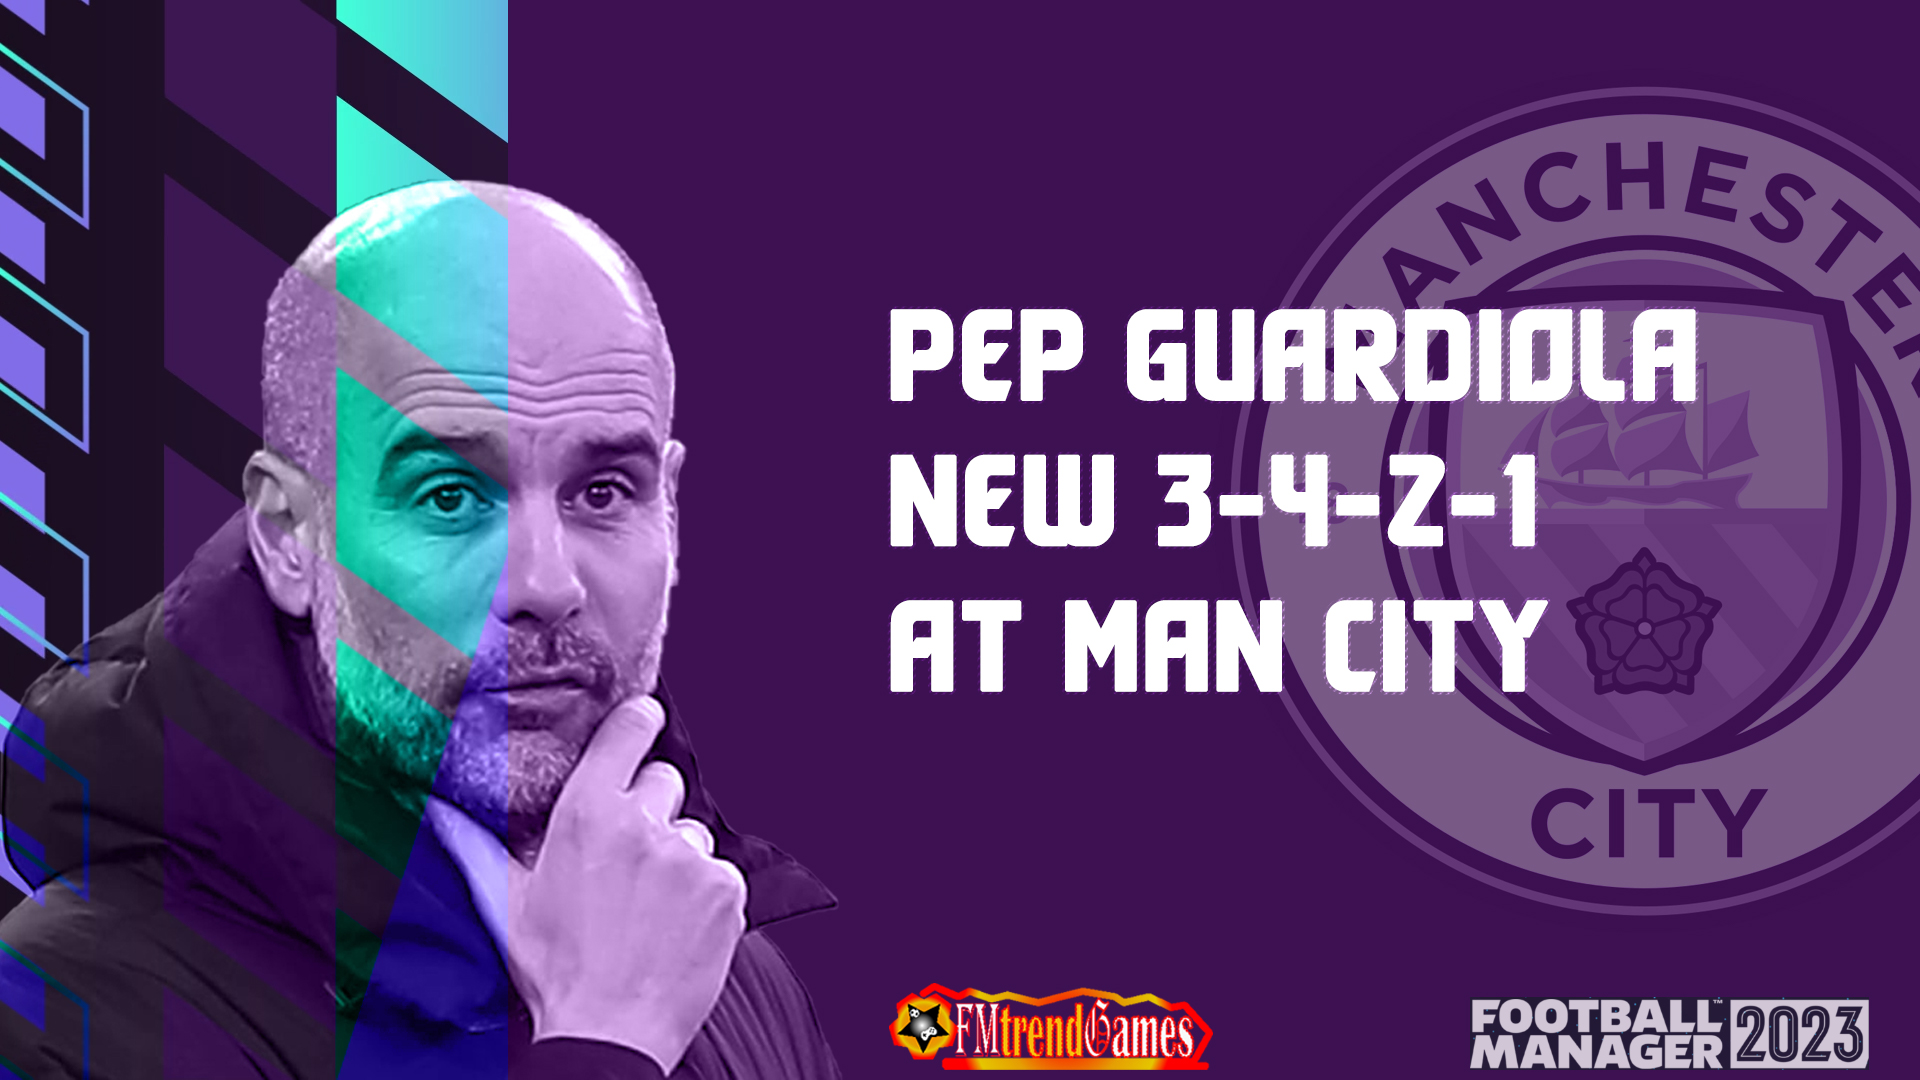 New Pep Guardiola 3-4-2-1 Tactic with Man City